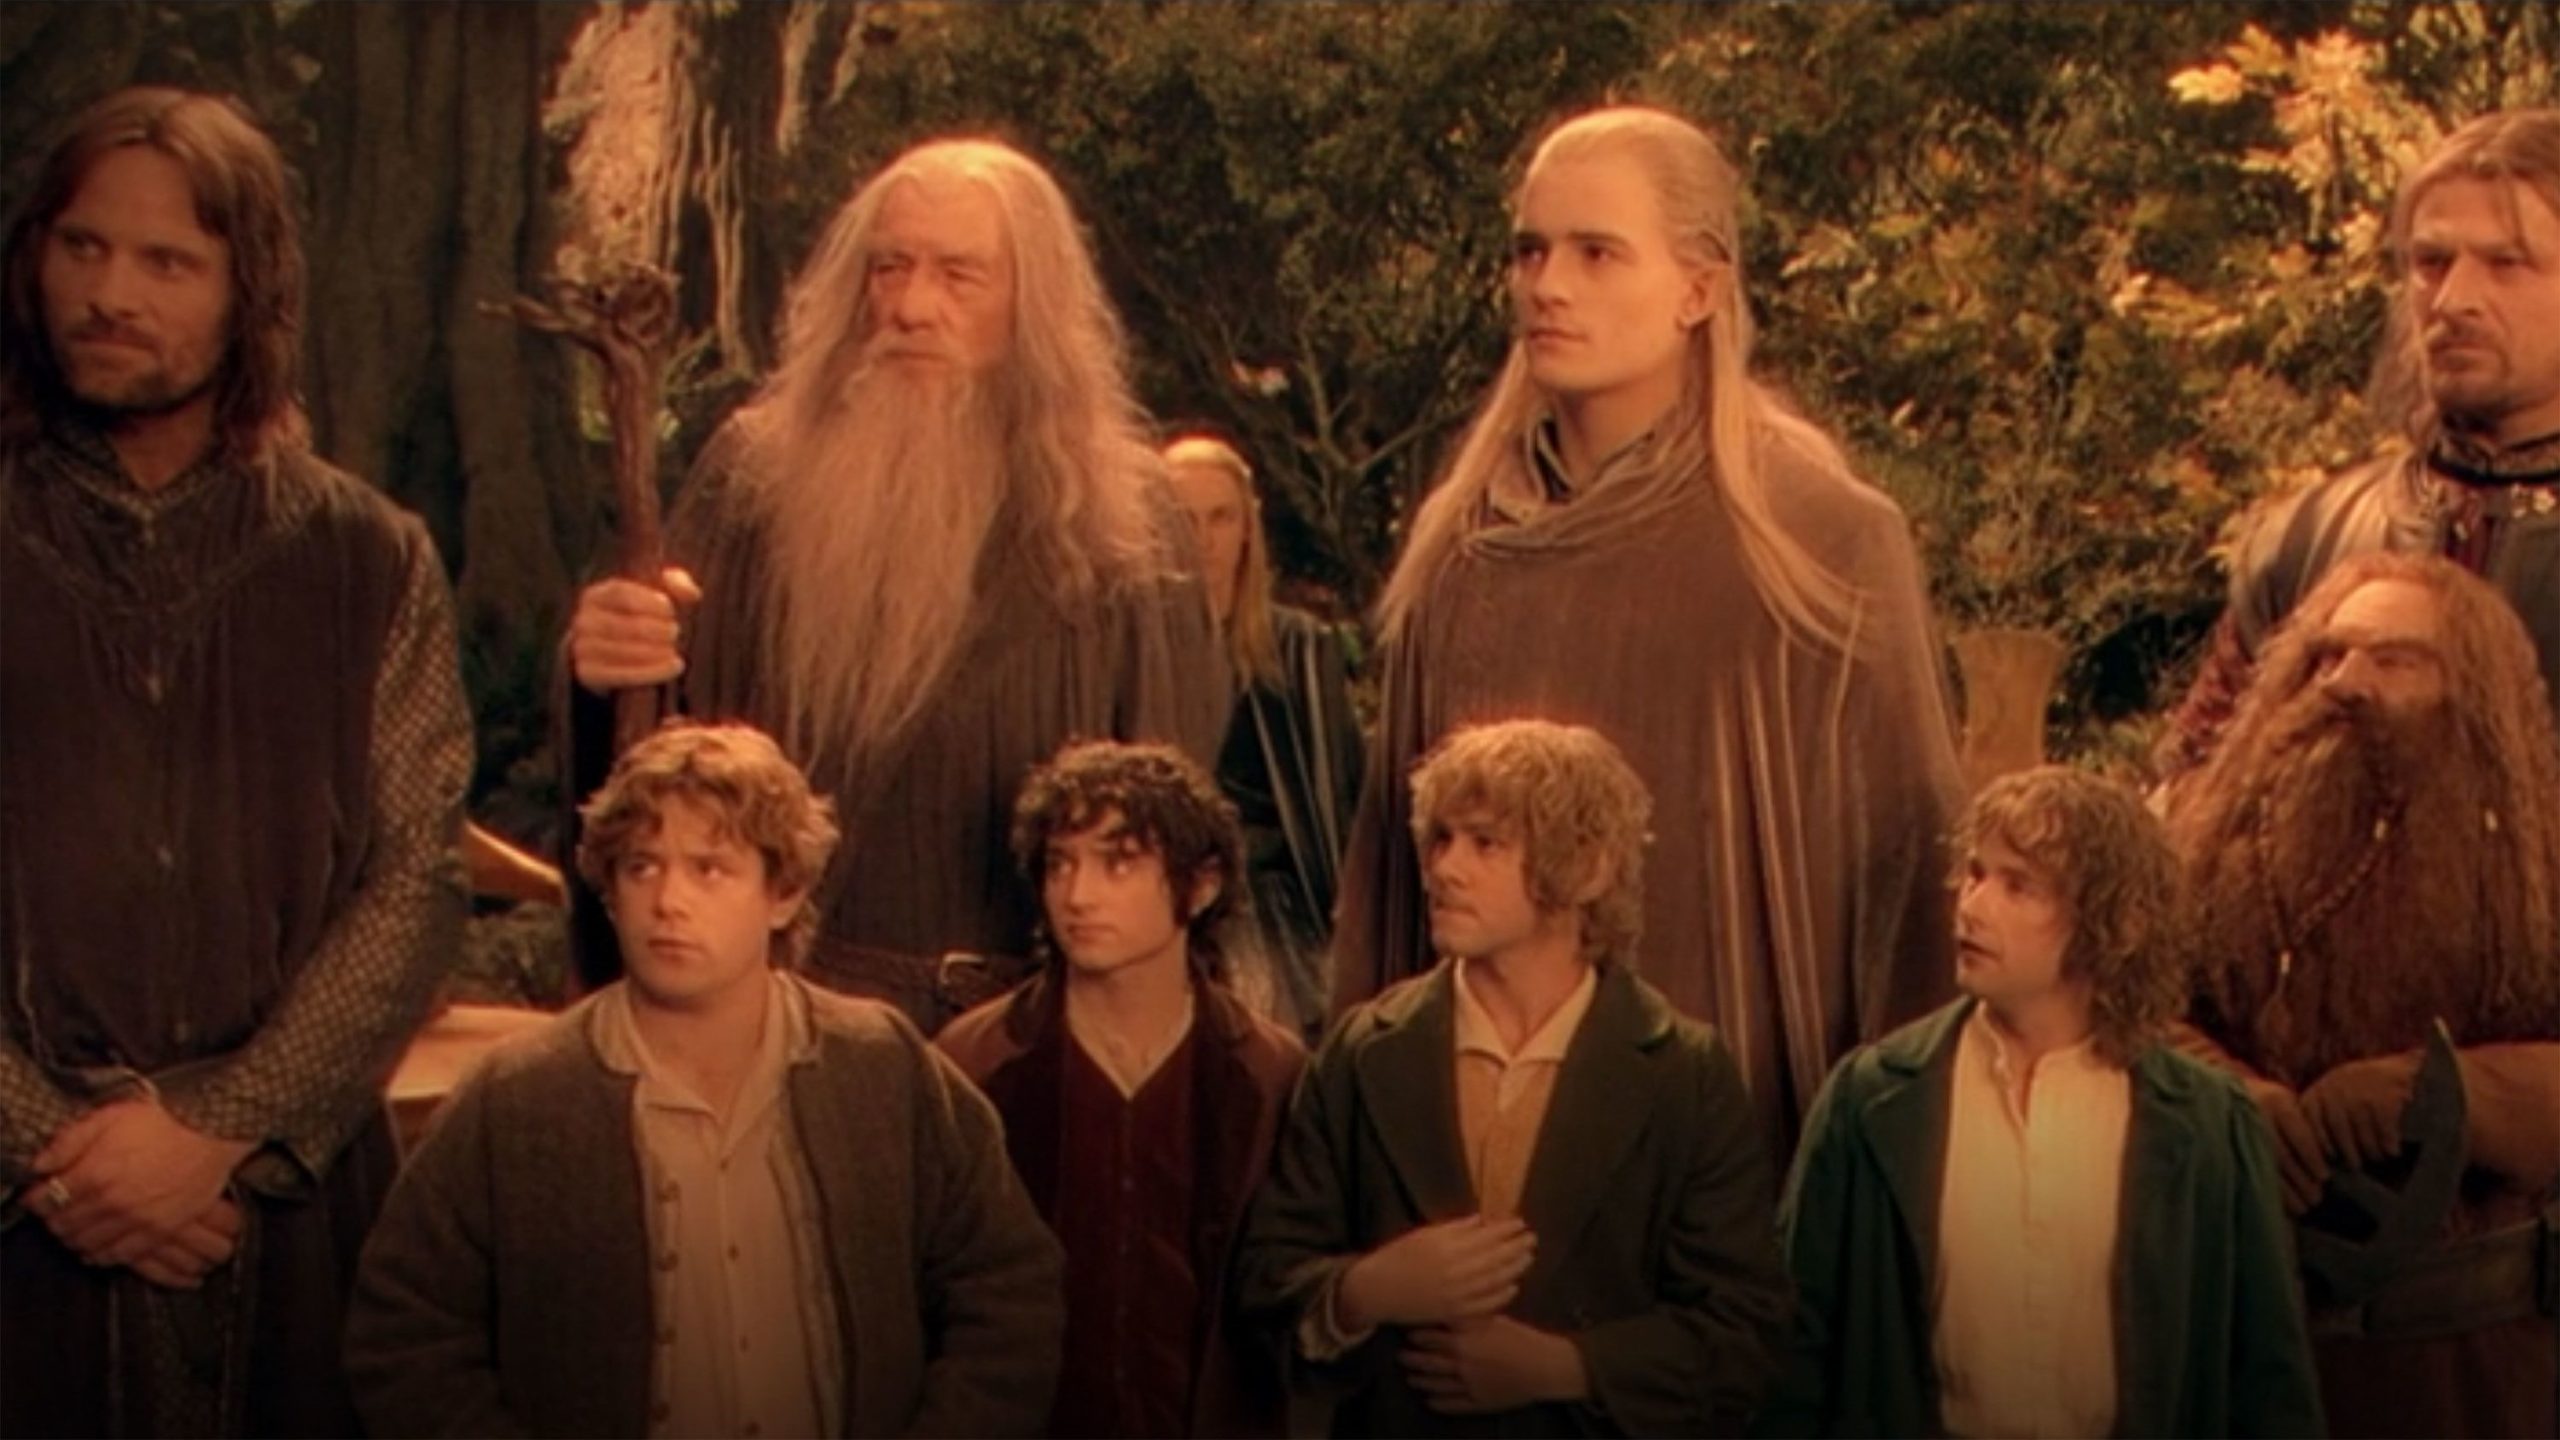 Warner Bros. And New Line Sign Deal To Develop New ‘Lord of the Rings’ Movies